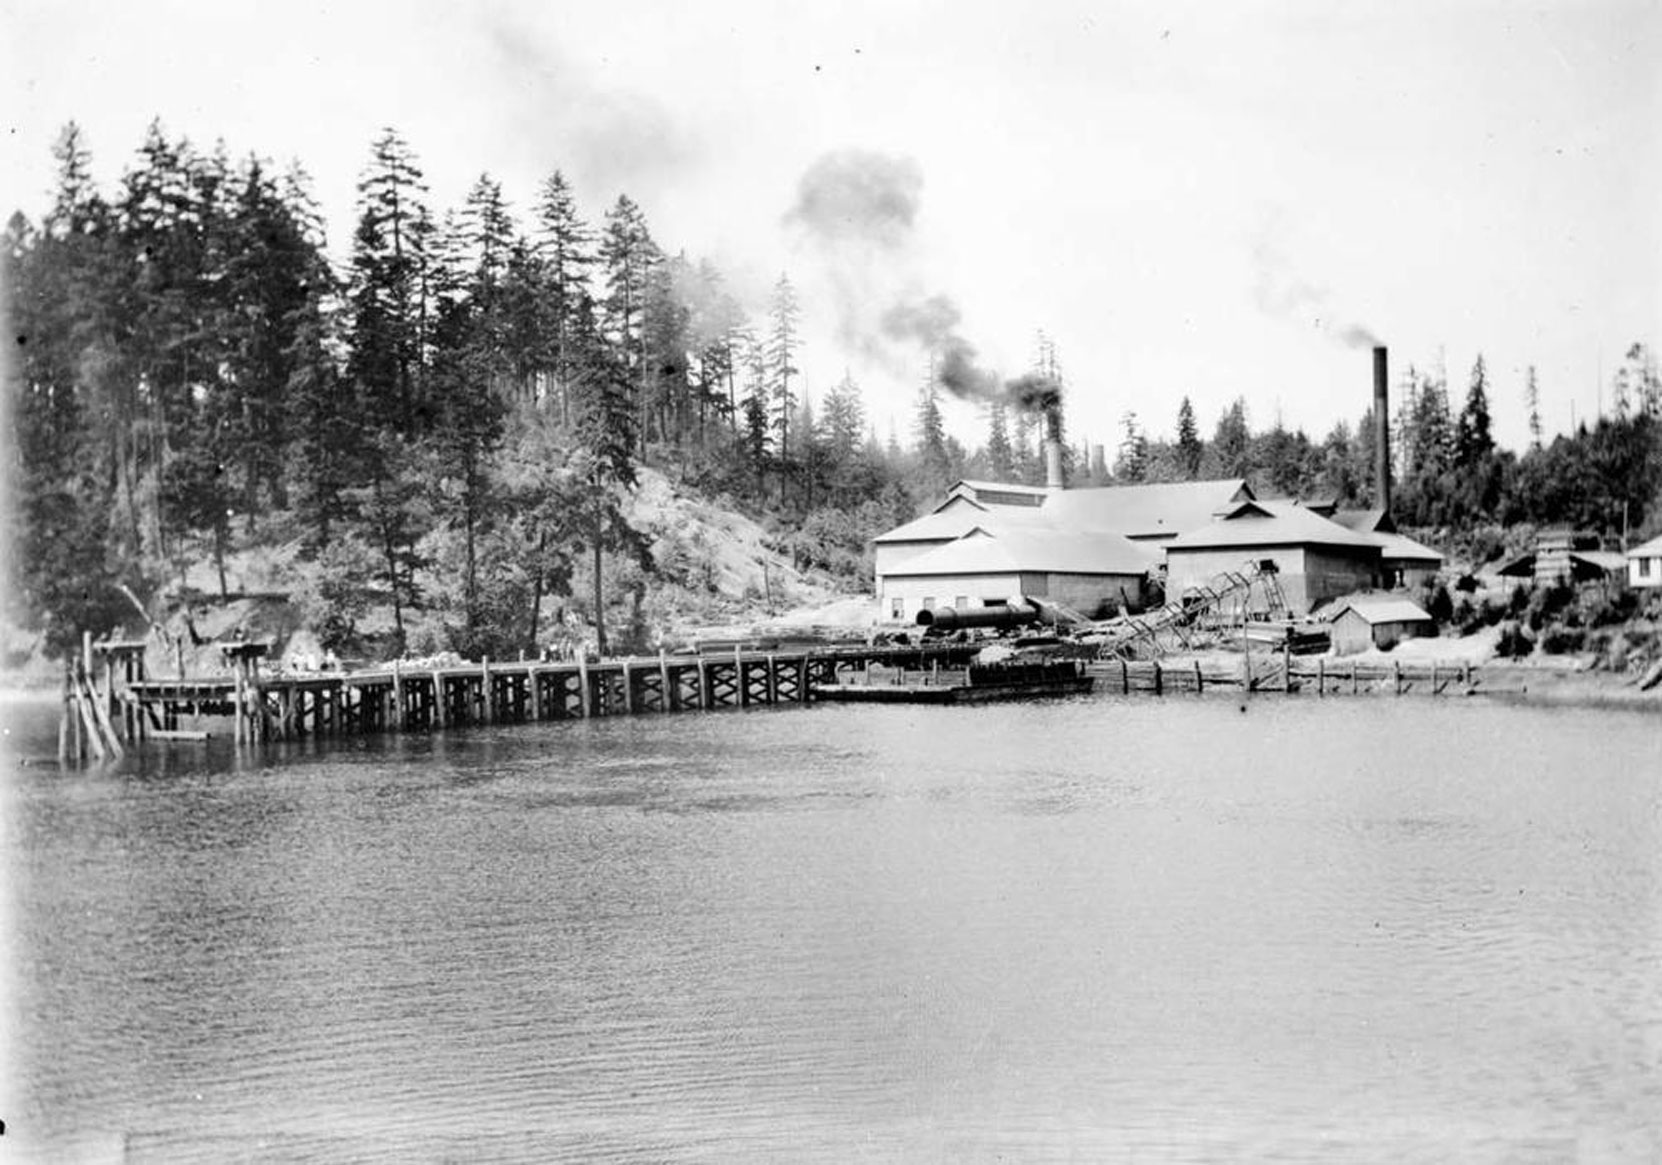 Vancouver Portland Cement Company plant at Tod Inlet, circa 1910 (BC Archives photo G-6194)